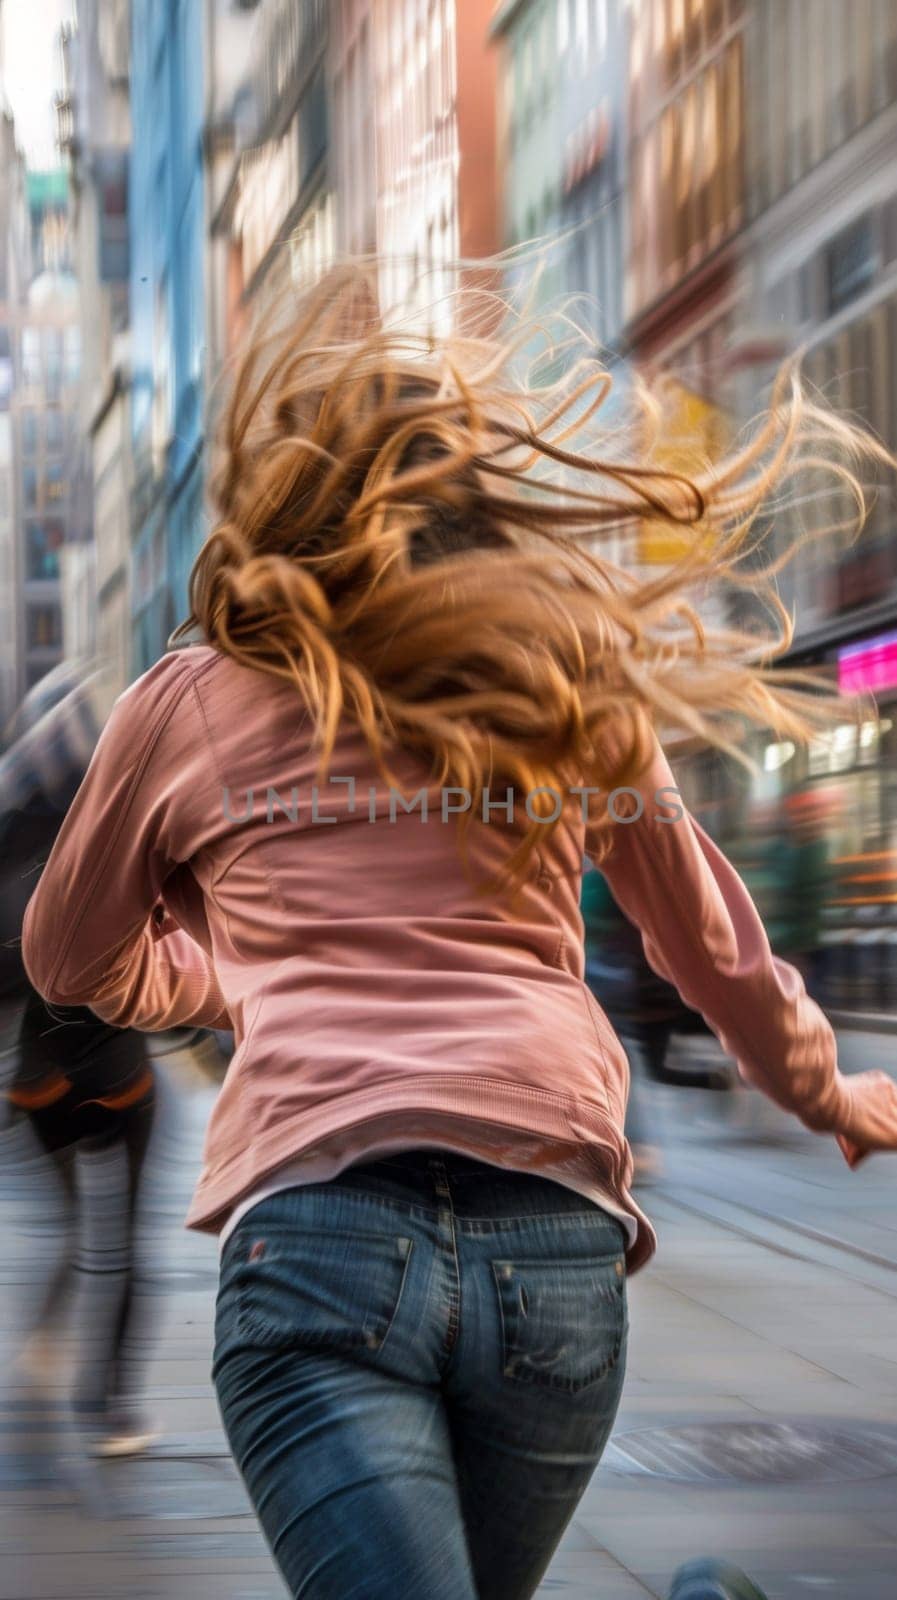 A woman running down a city street with her hair blowing in the wind